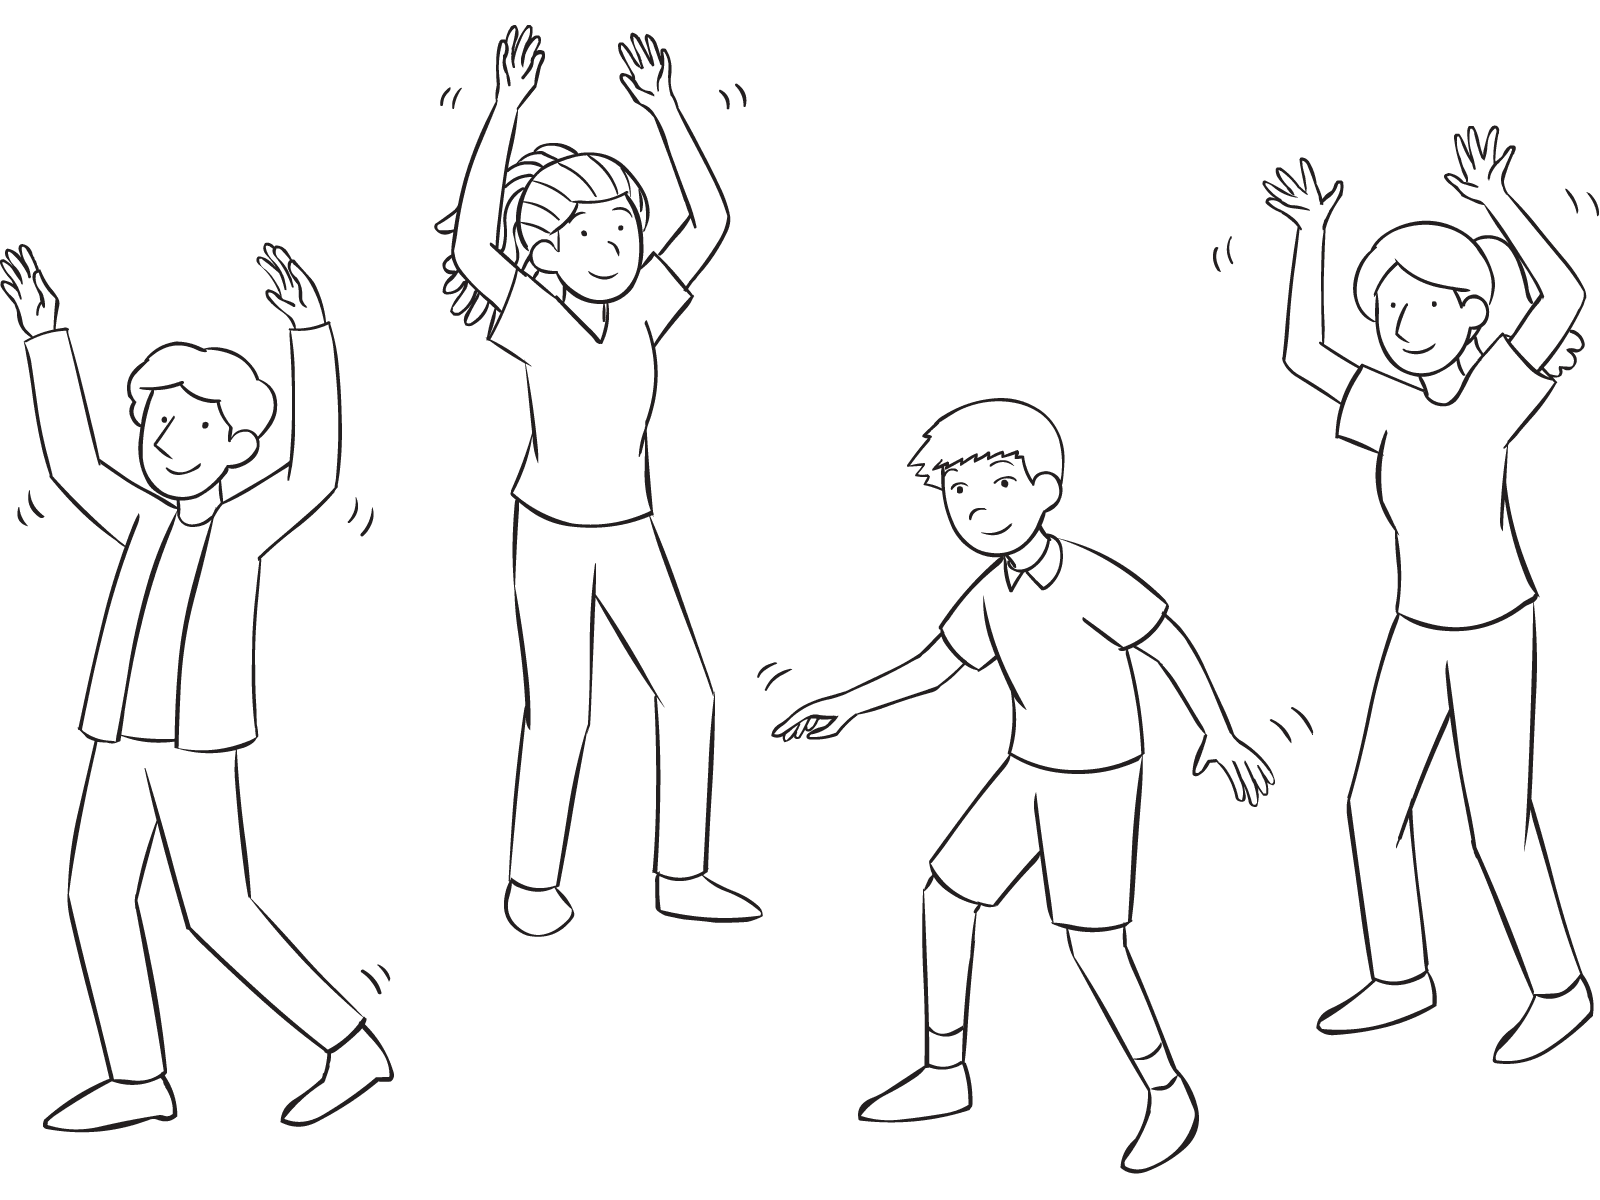 Freeze Action - Gentle Movement Exercise to Show Leadership